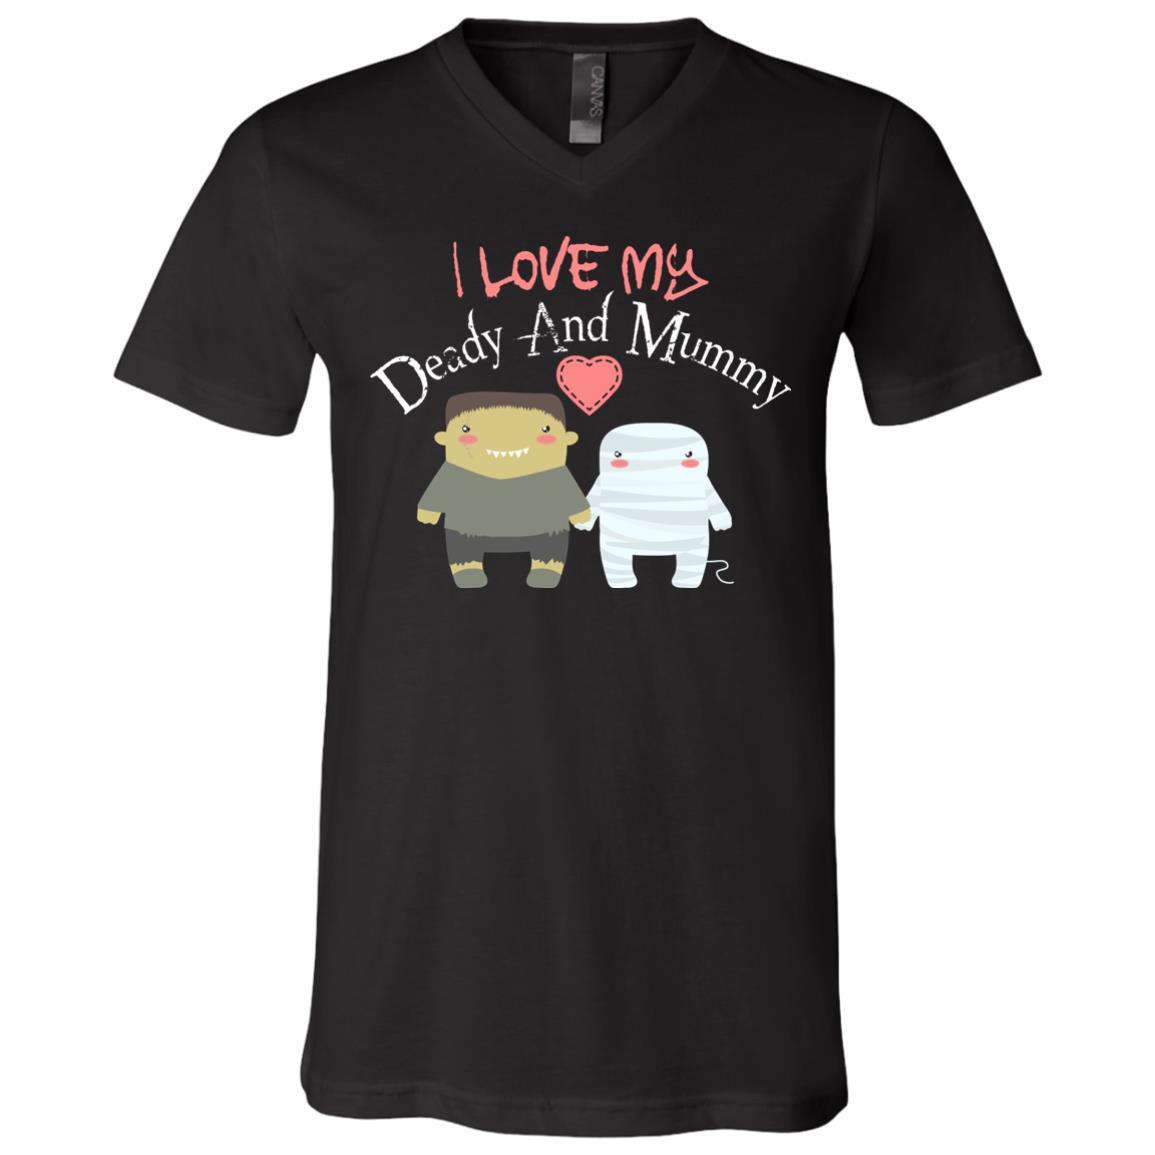 Funny shirt For Mom And Dad Deady and Mummy Unisex Tees - GoneBold.gift